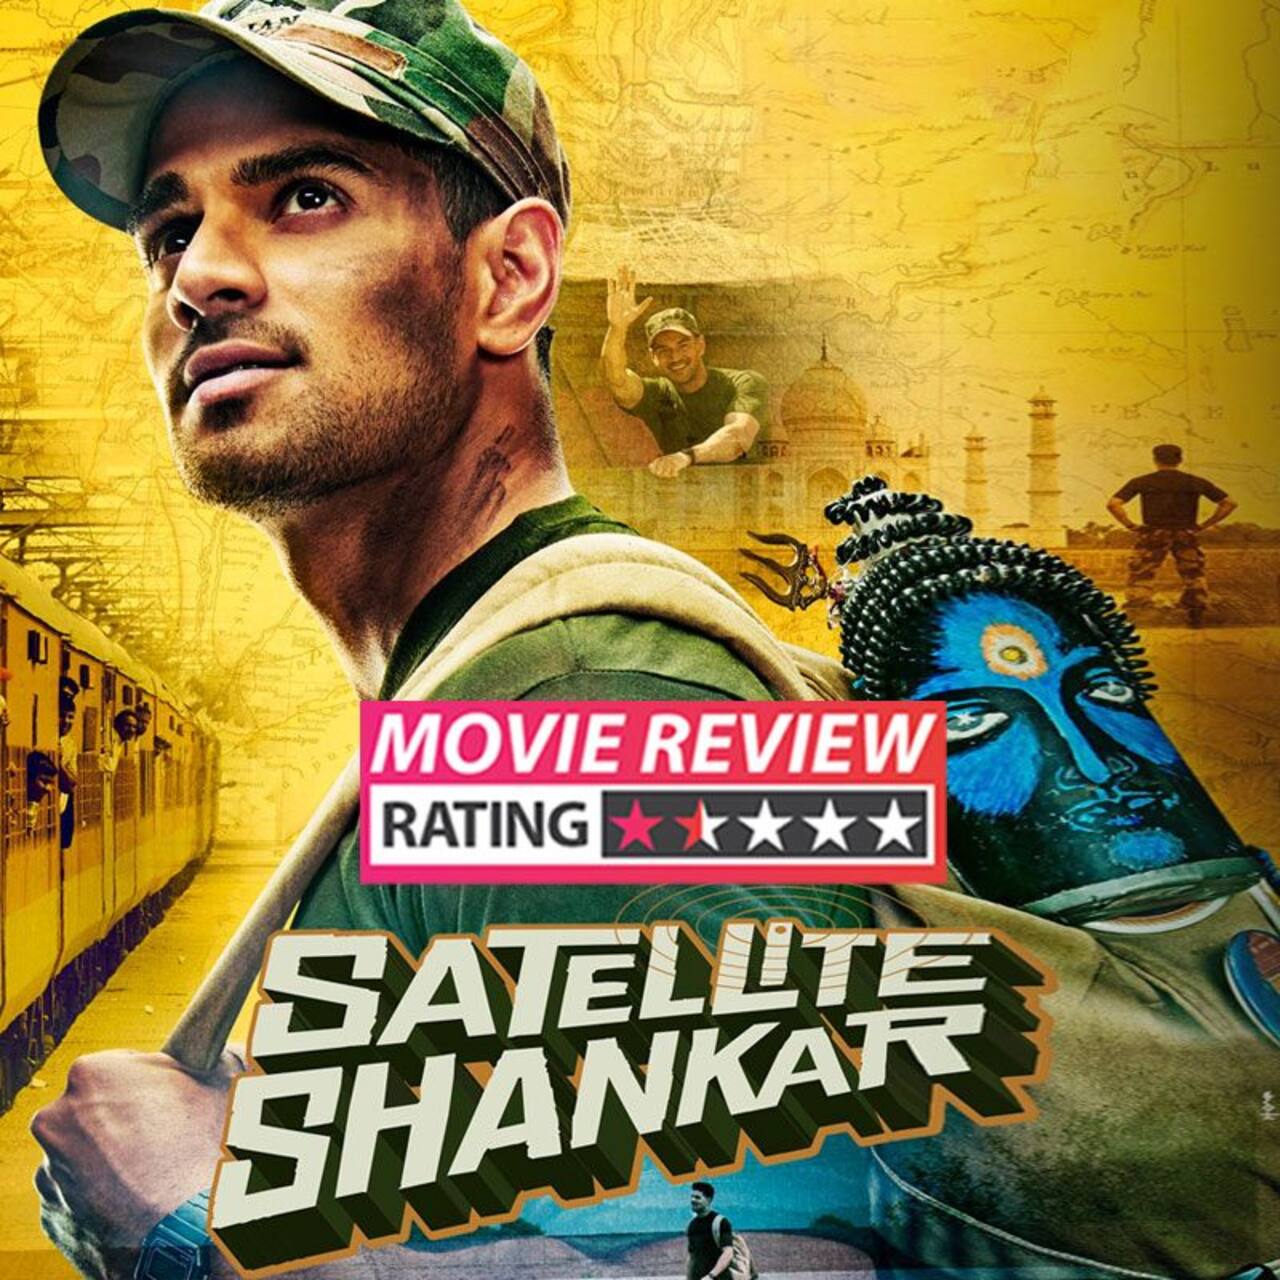 Satellite Shankar movie review: Sooraj Pancholi's film is exhausting in most parts and forgetful in rest